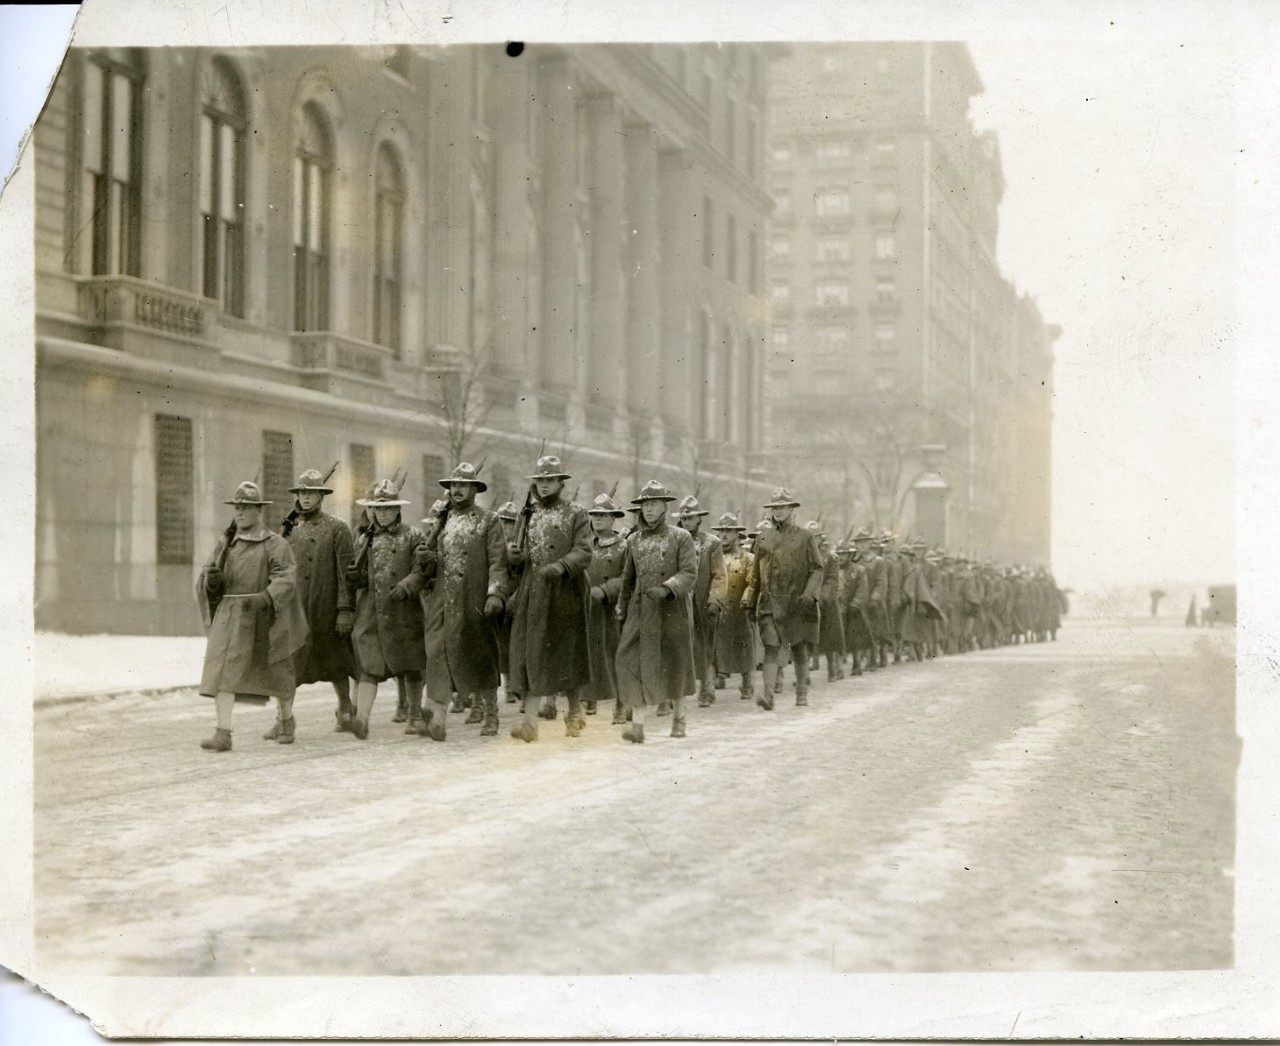 Student soldiers marching on Broadway, circa 1918